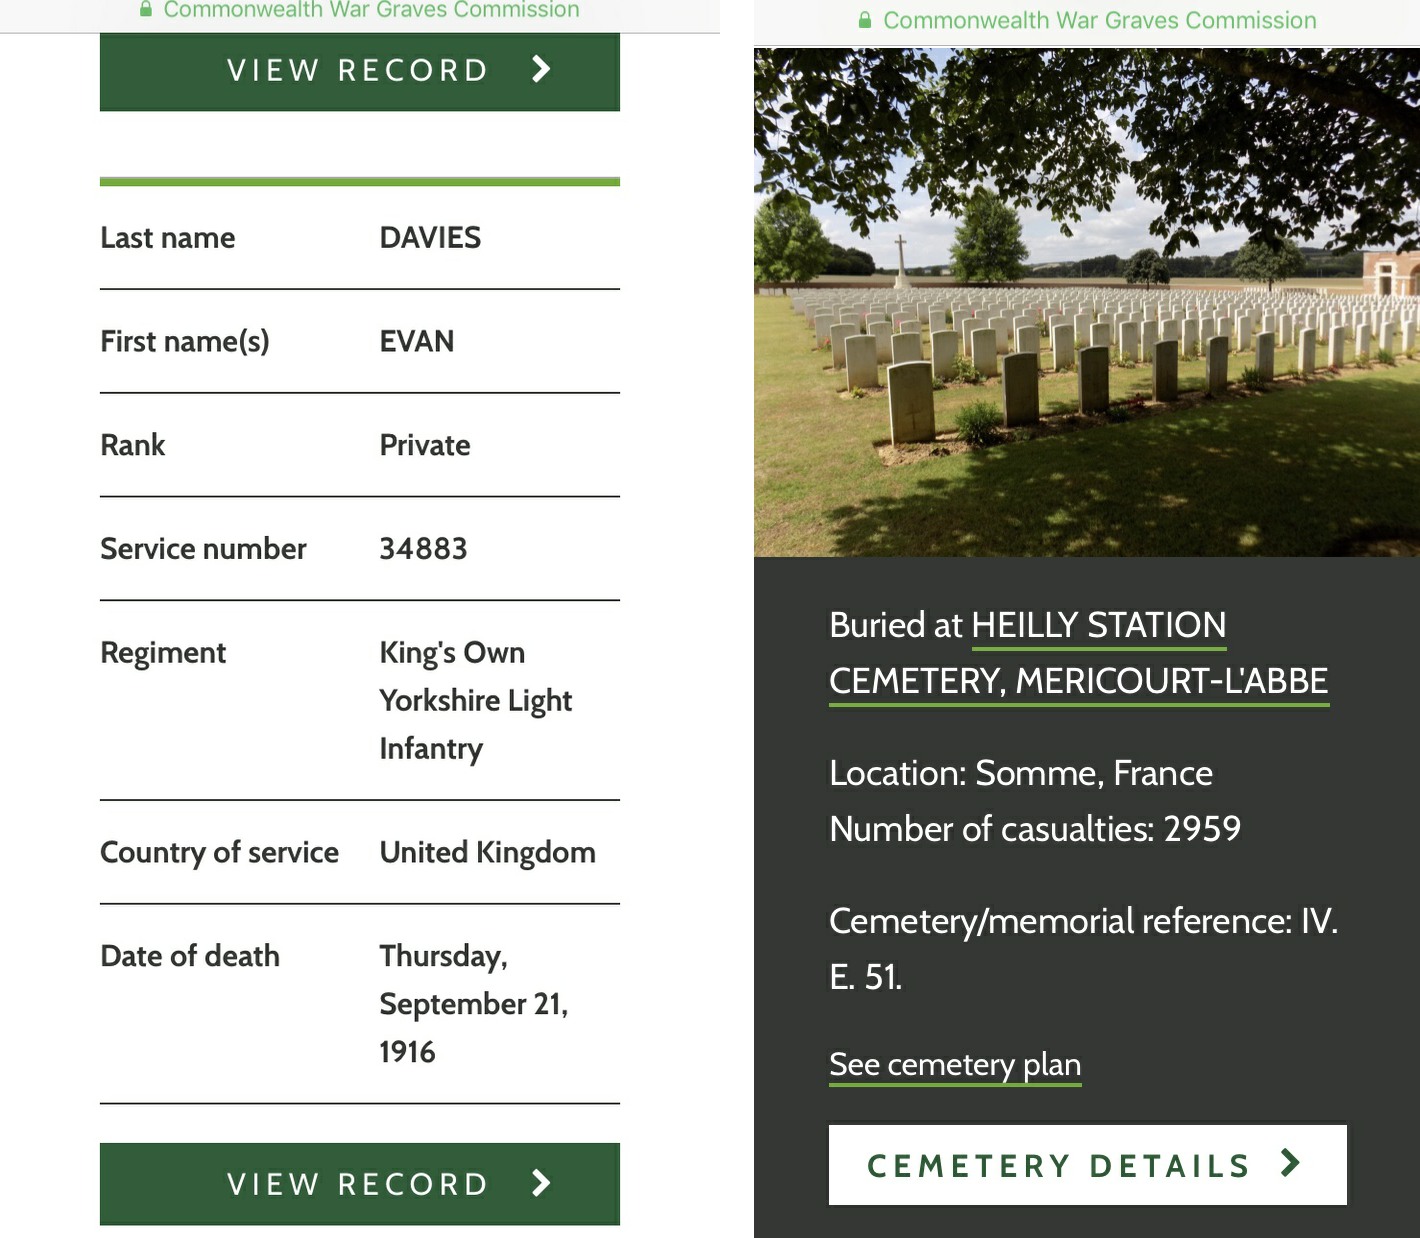 Private Evan Davies: Confirmation of grave location from the Commonwealth War Graves Commission Website.